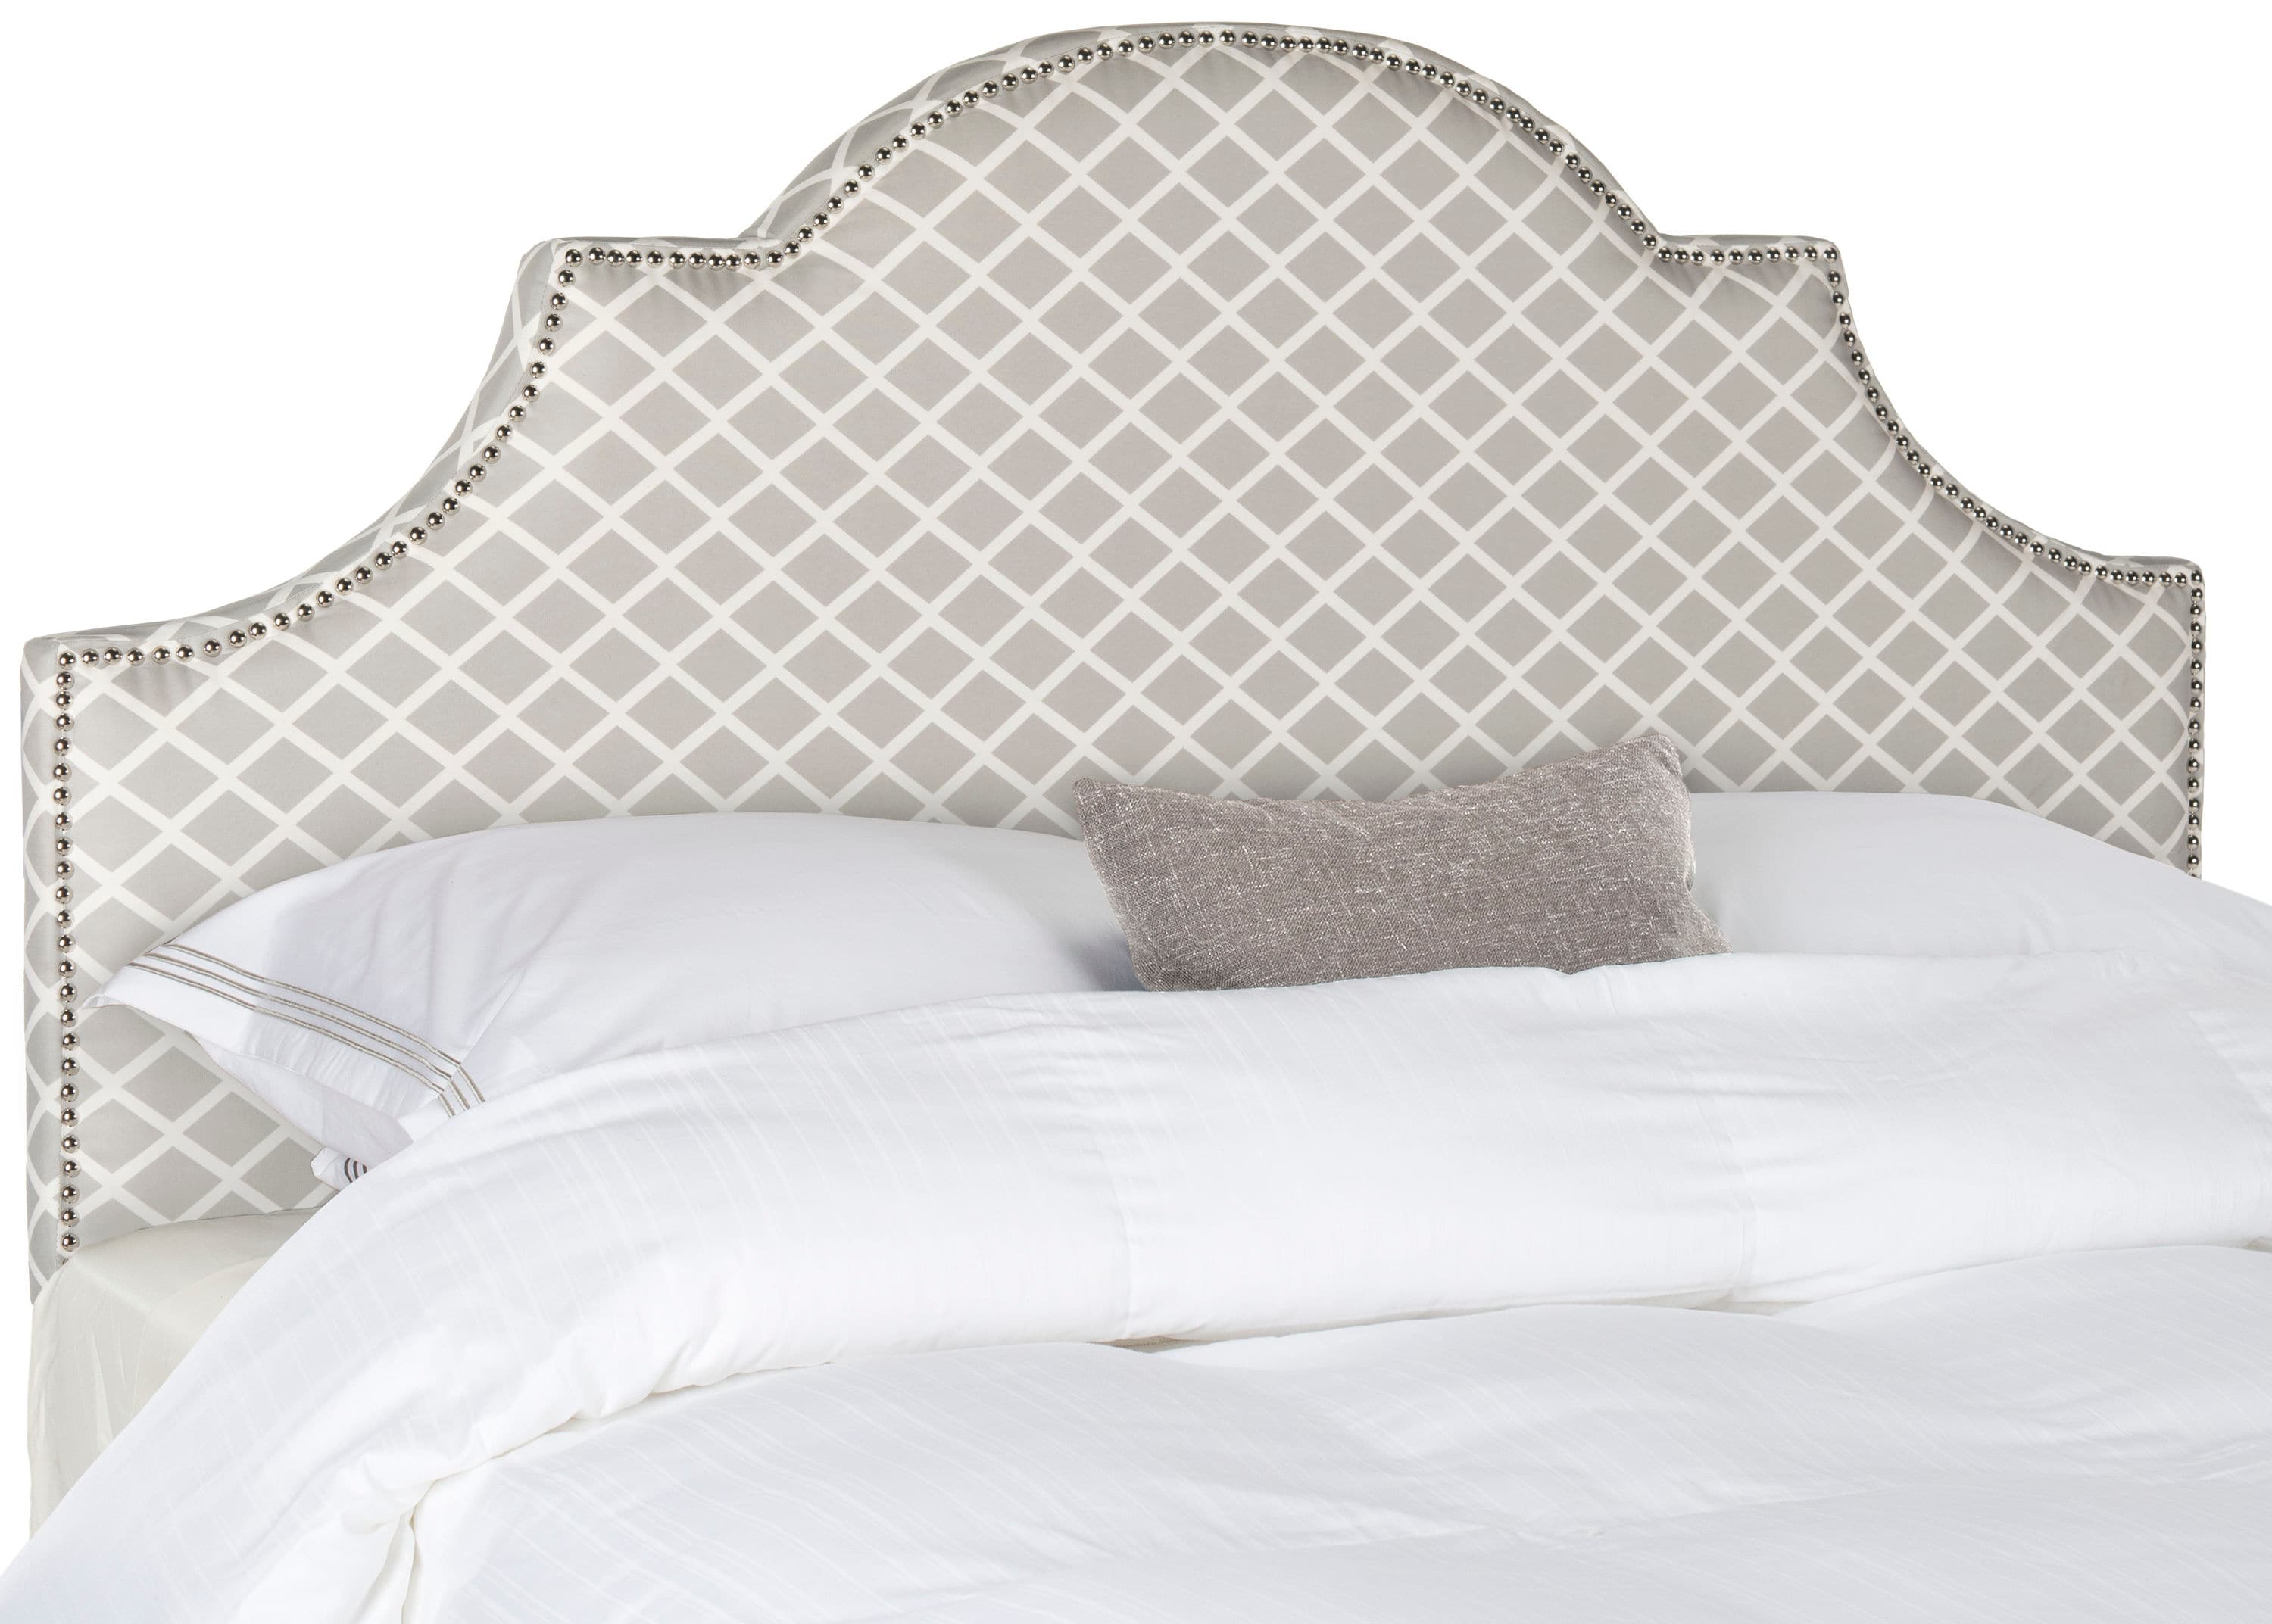 Safavieh Hallmar Gray/White Queen Synthetic Upholstered Headboard in ...